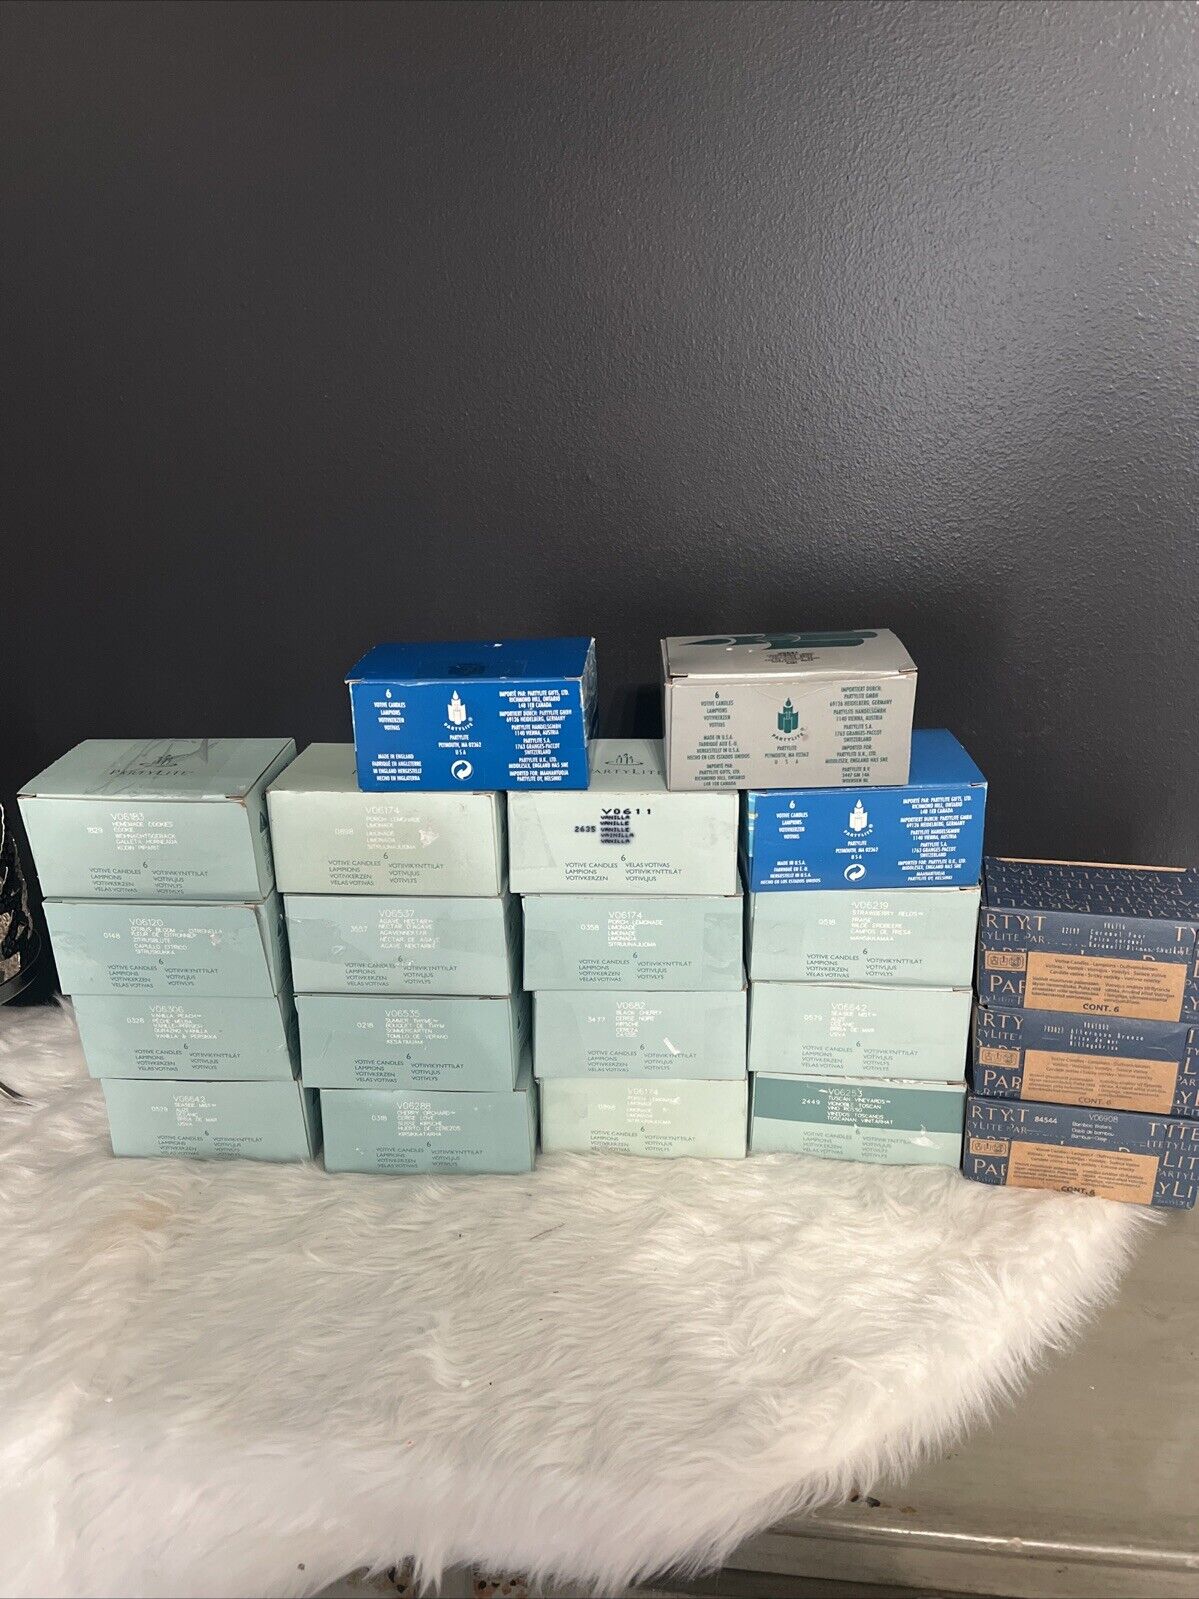 Partylite Lot Of 21 Boxes Of Votive Candle 126 Candles Assorted scent See Boxes